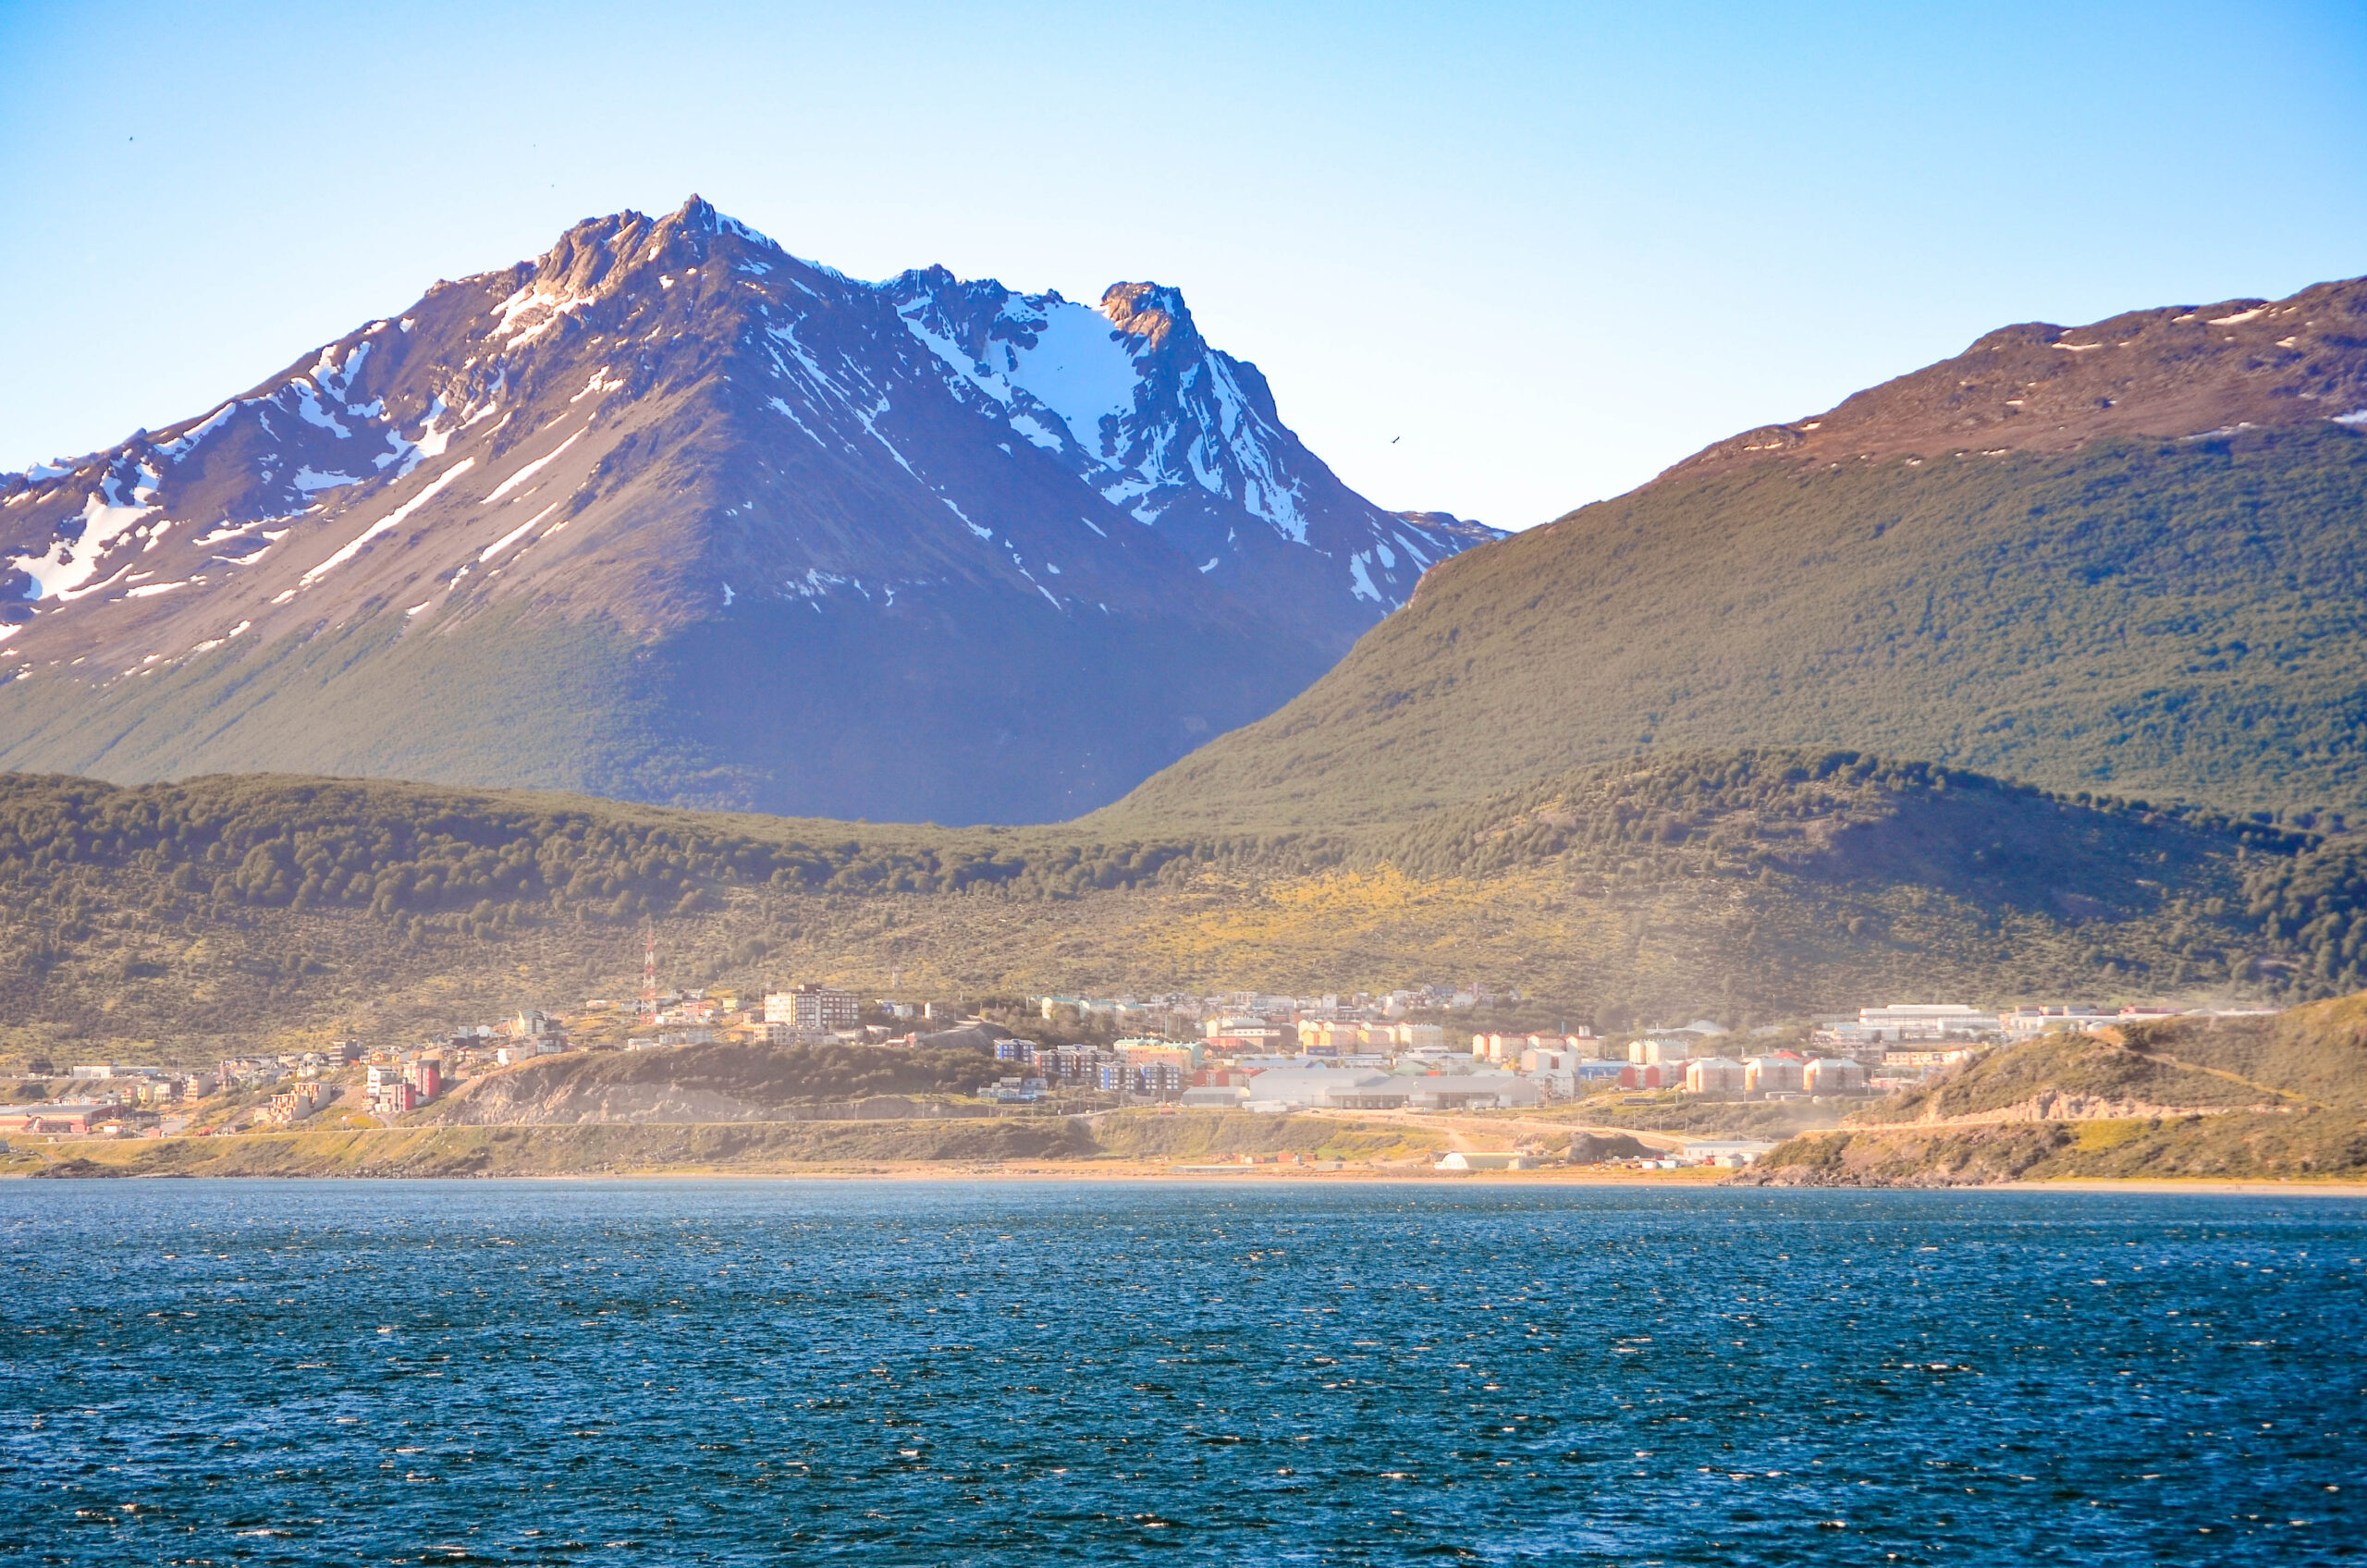 Ushuaia, Argentina, viewed from the Beagle Channel